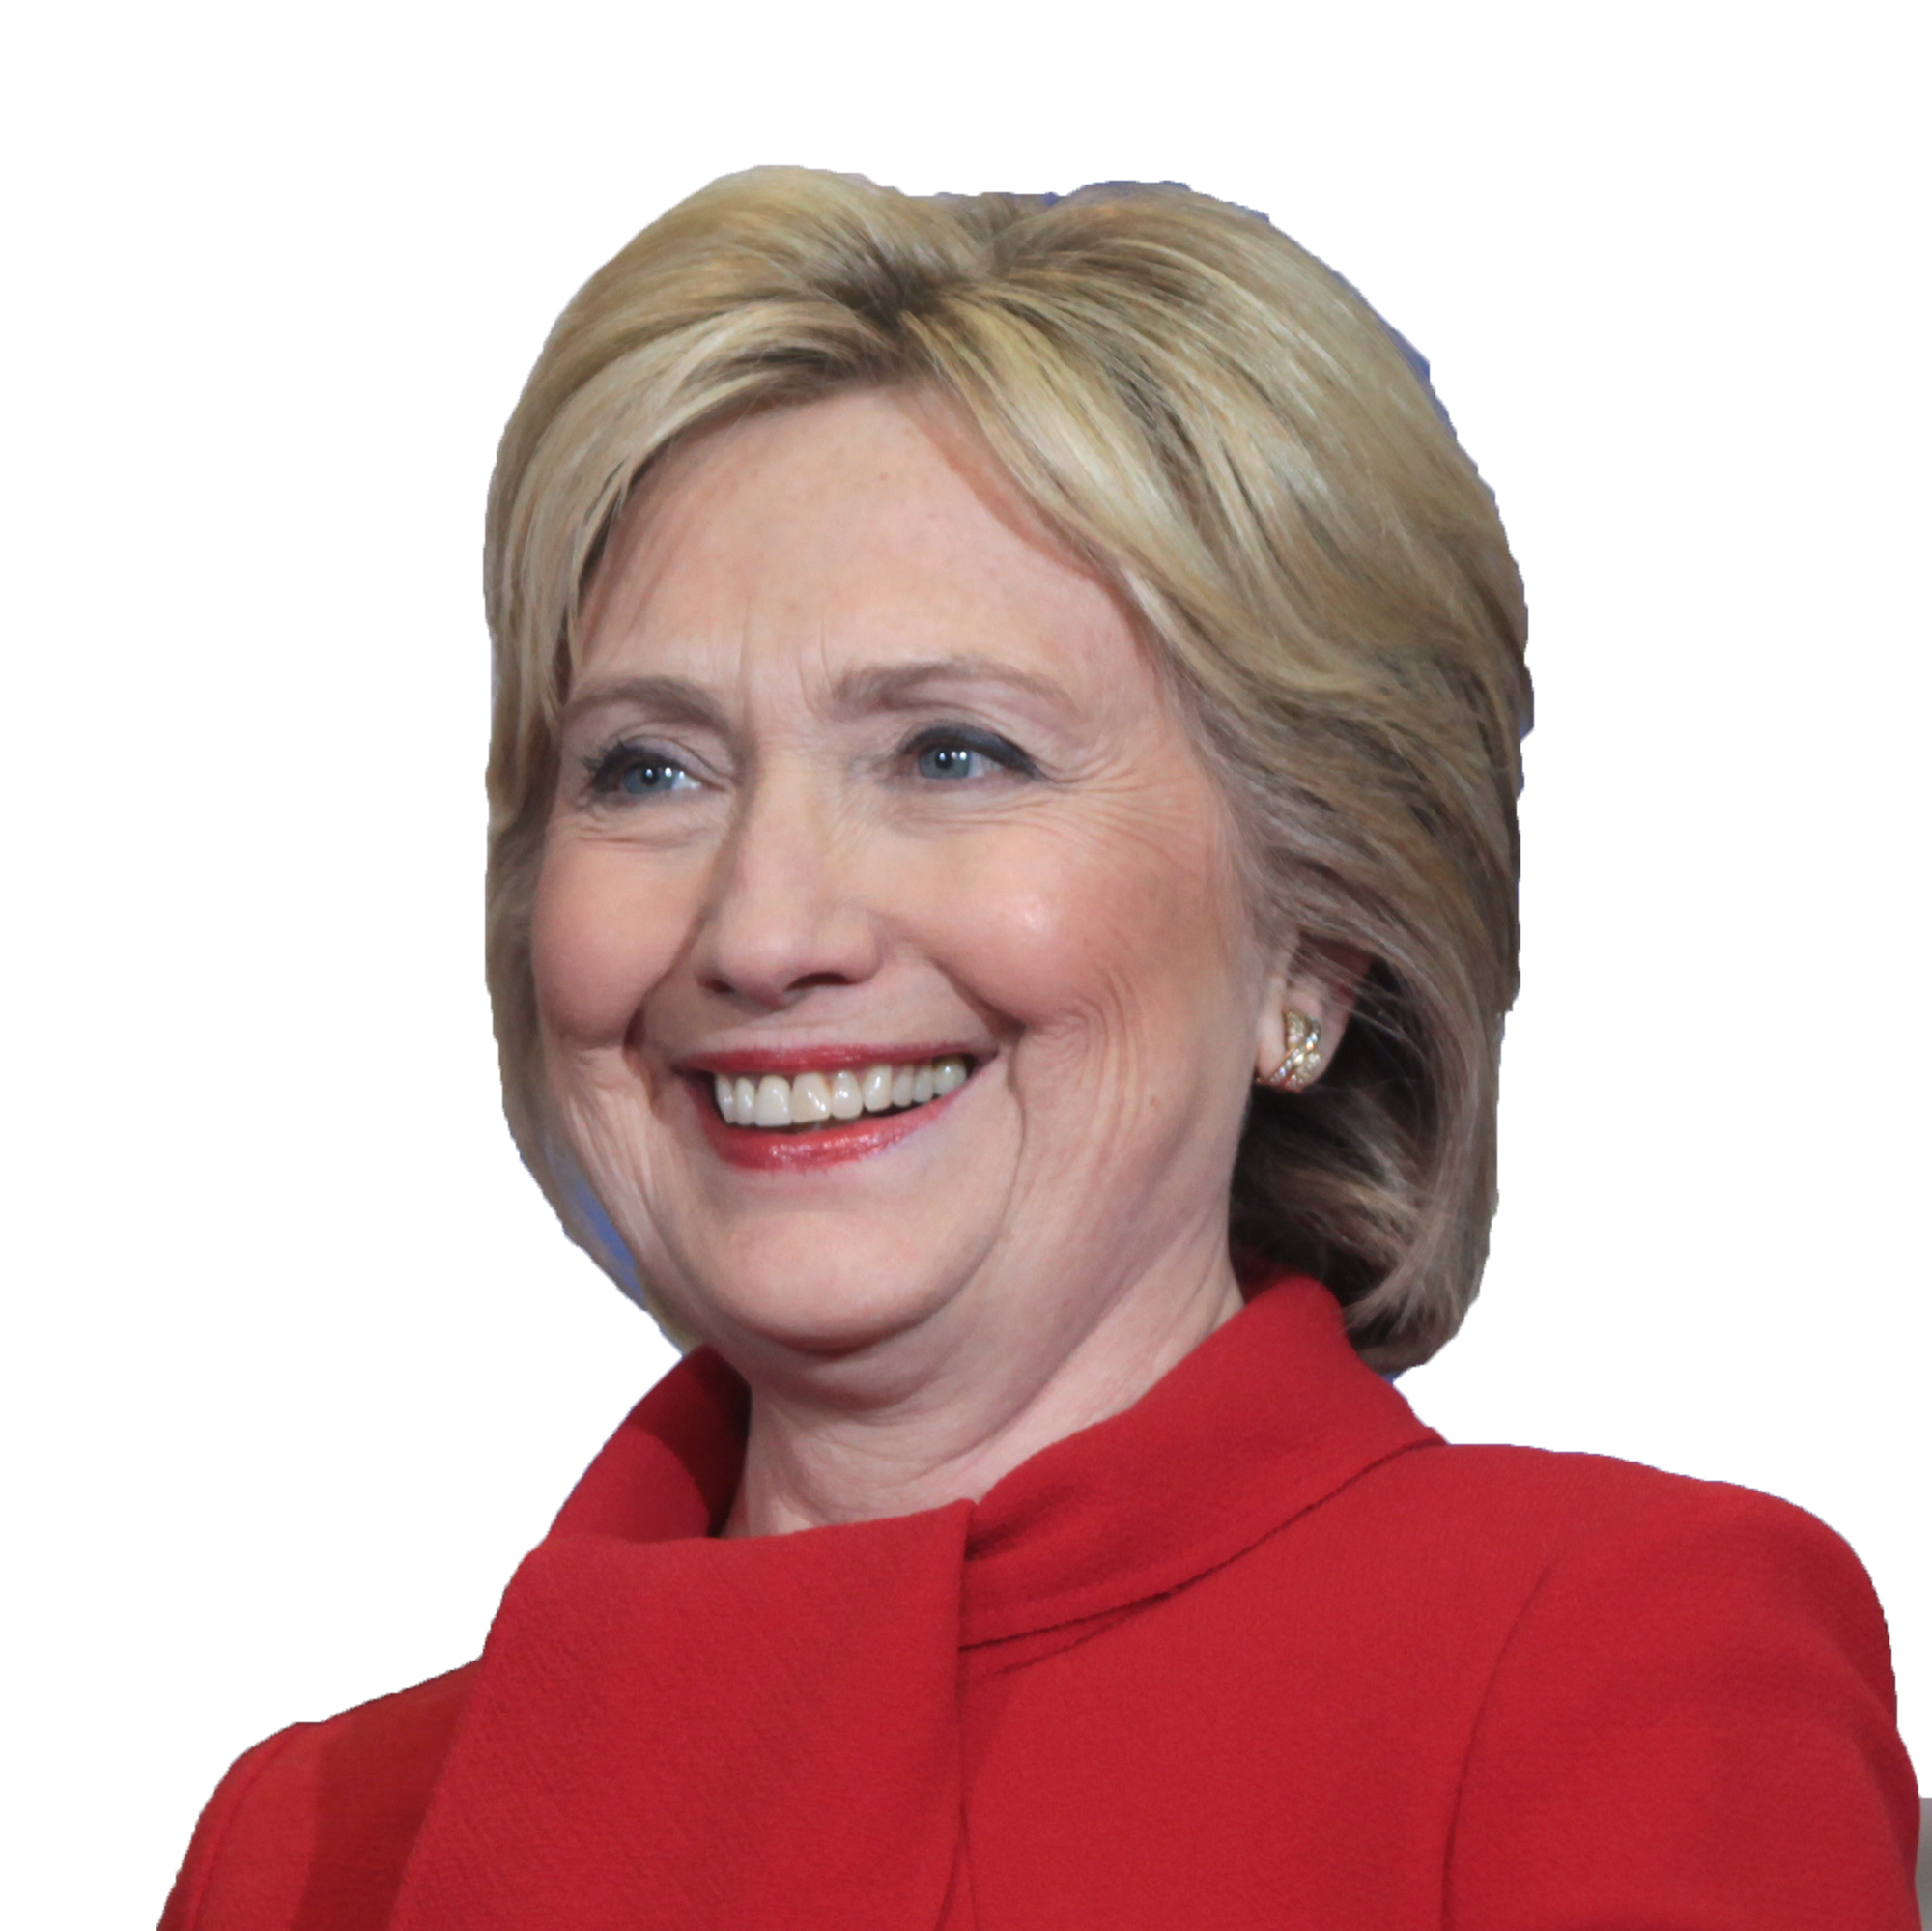 Smiling Clinton Hillary Download HQ PNG Image